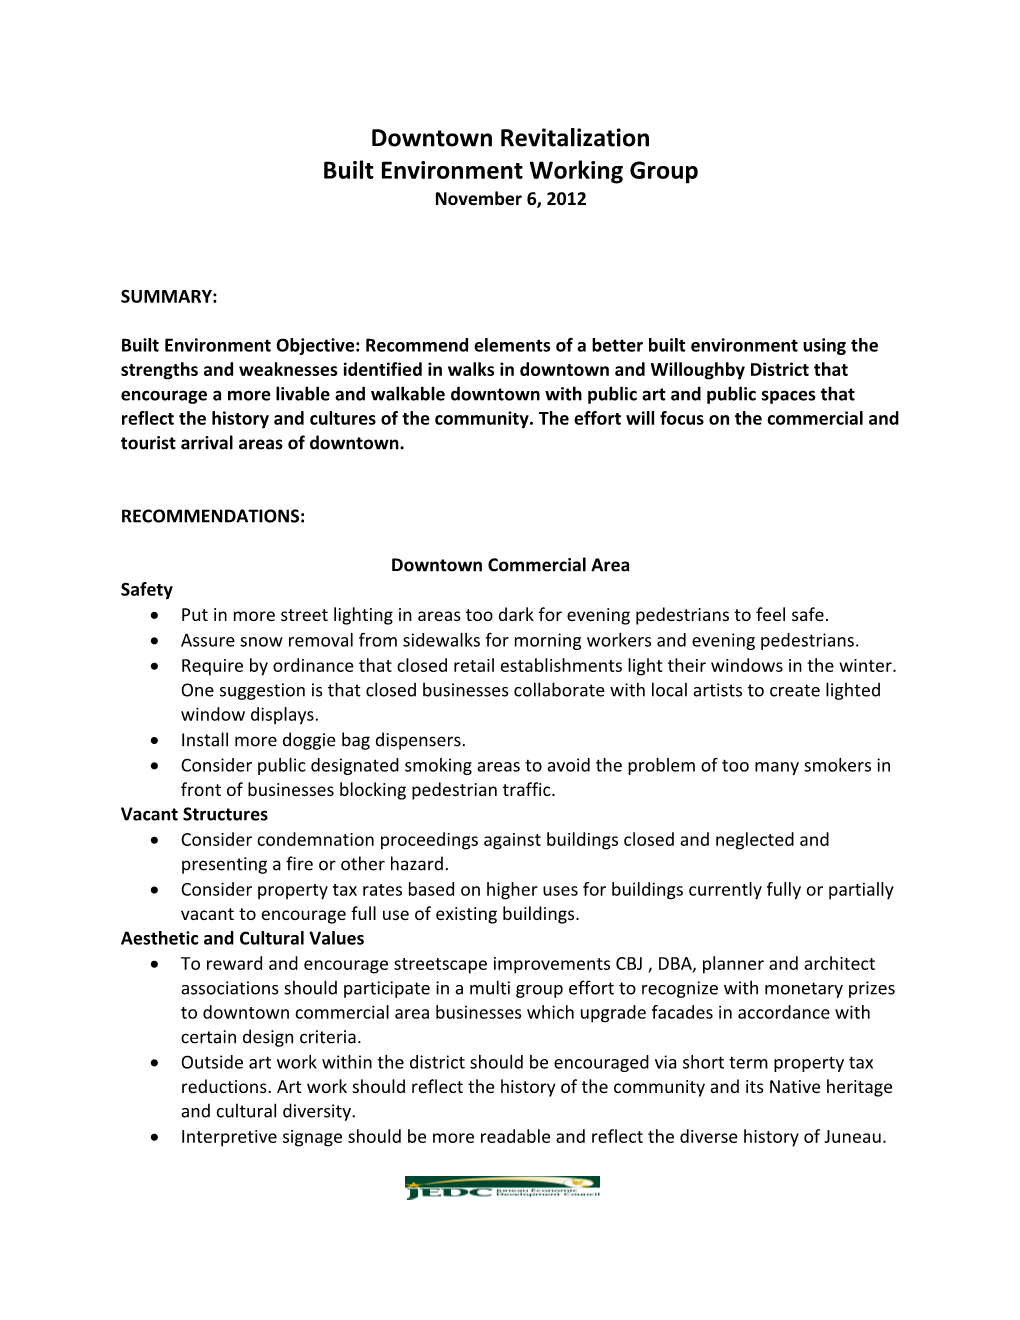 Built Environment Working Group